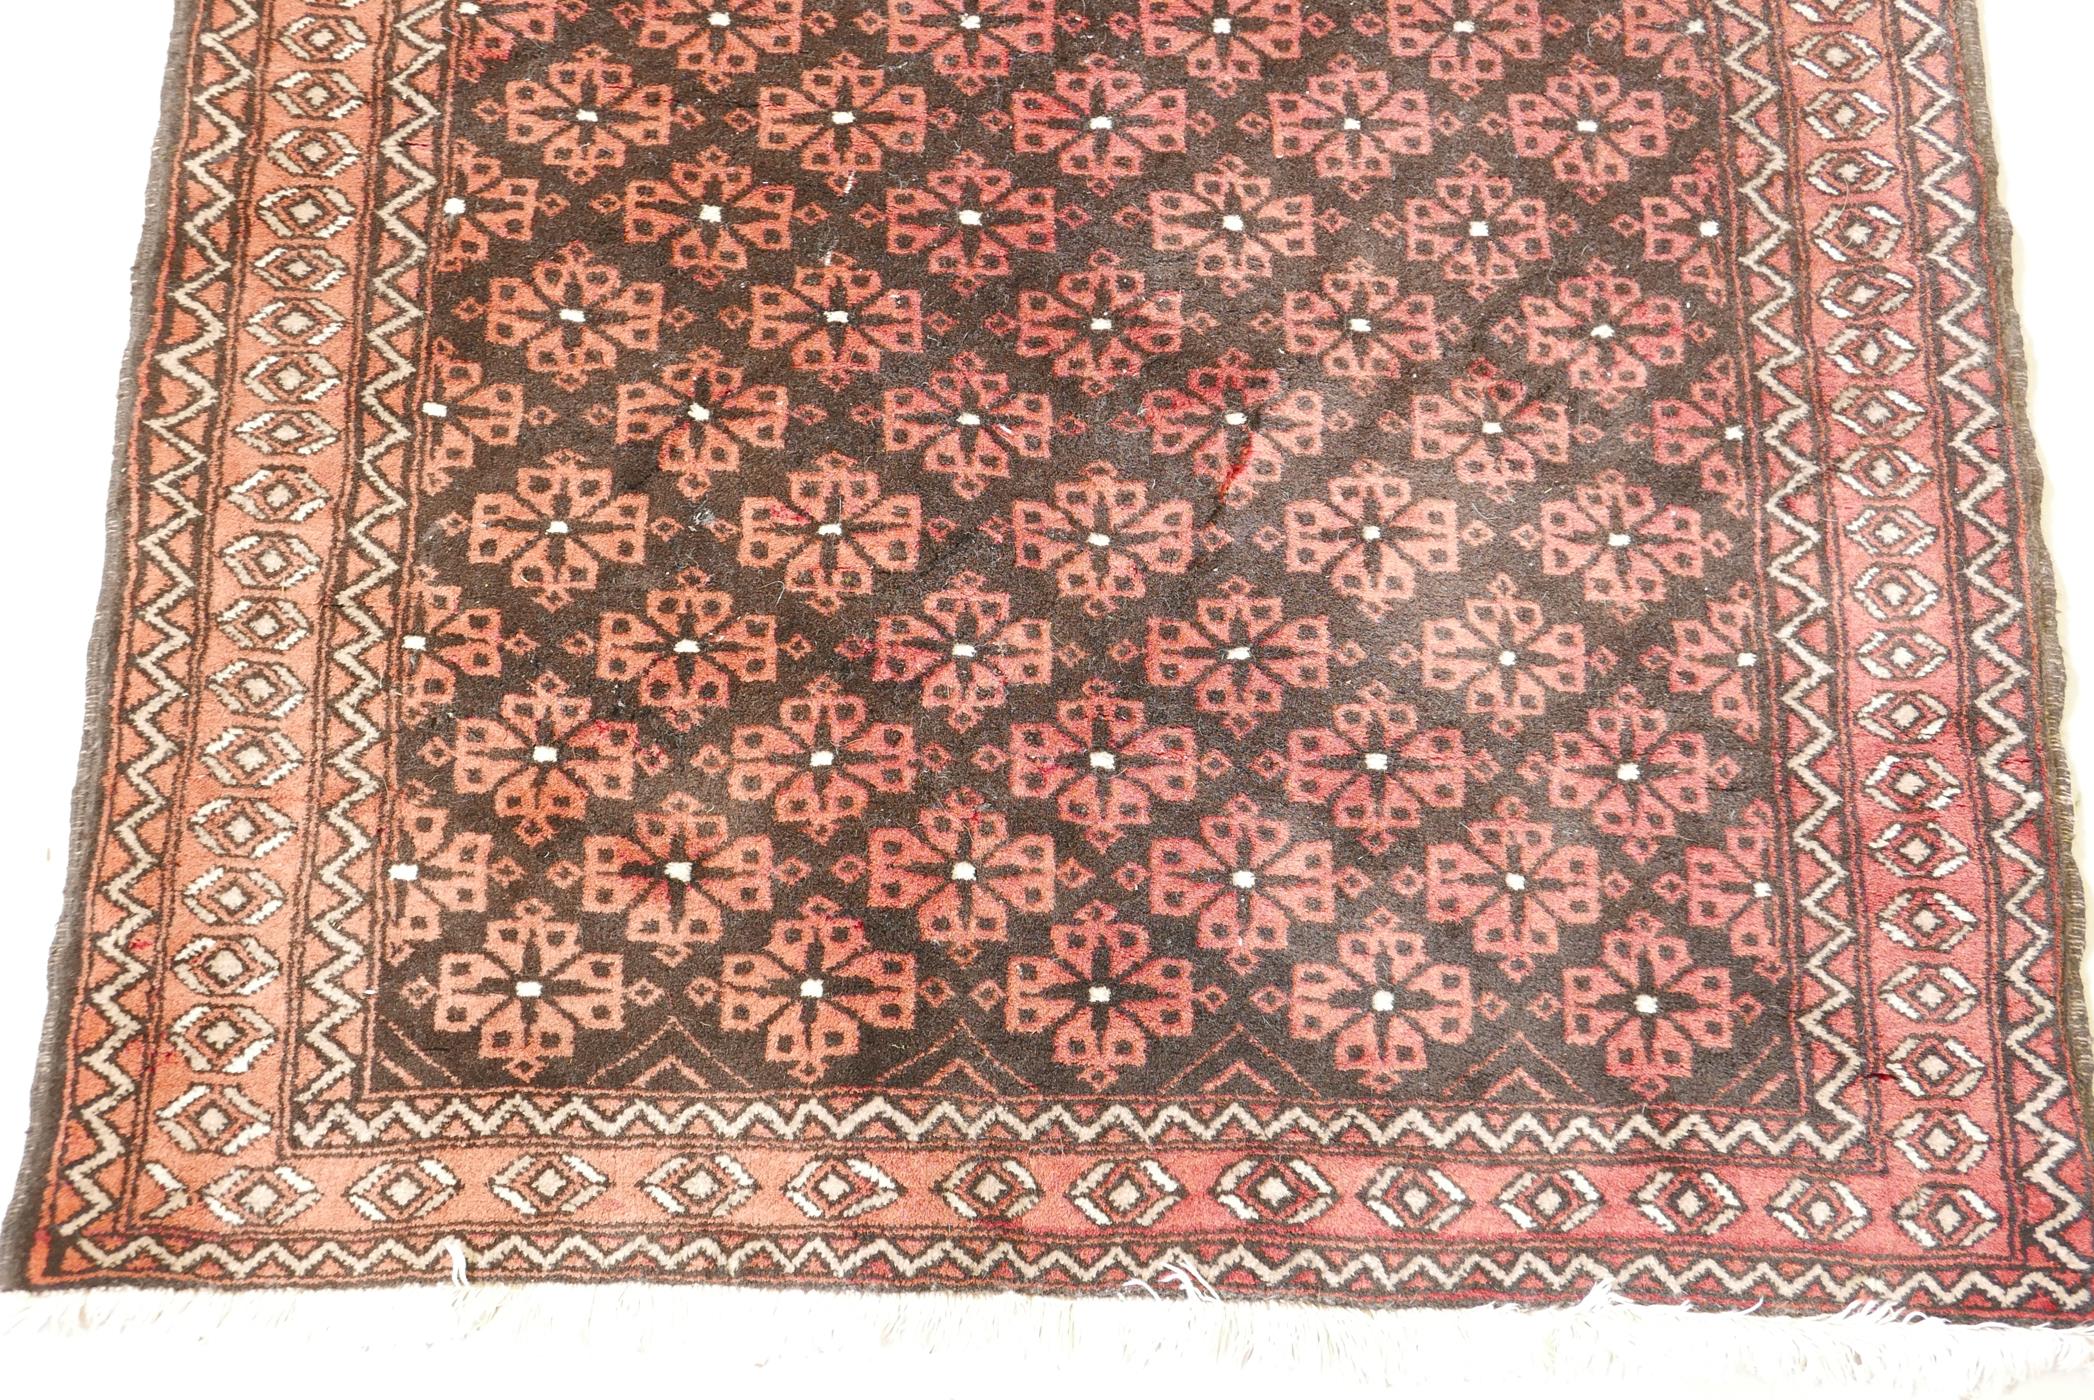 A hand woven rug with geometric floral design, on a faded red field. 41" x 78" - Image 2 of 3